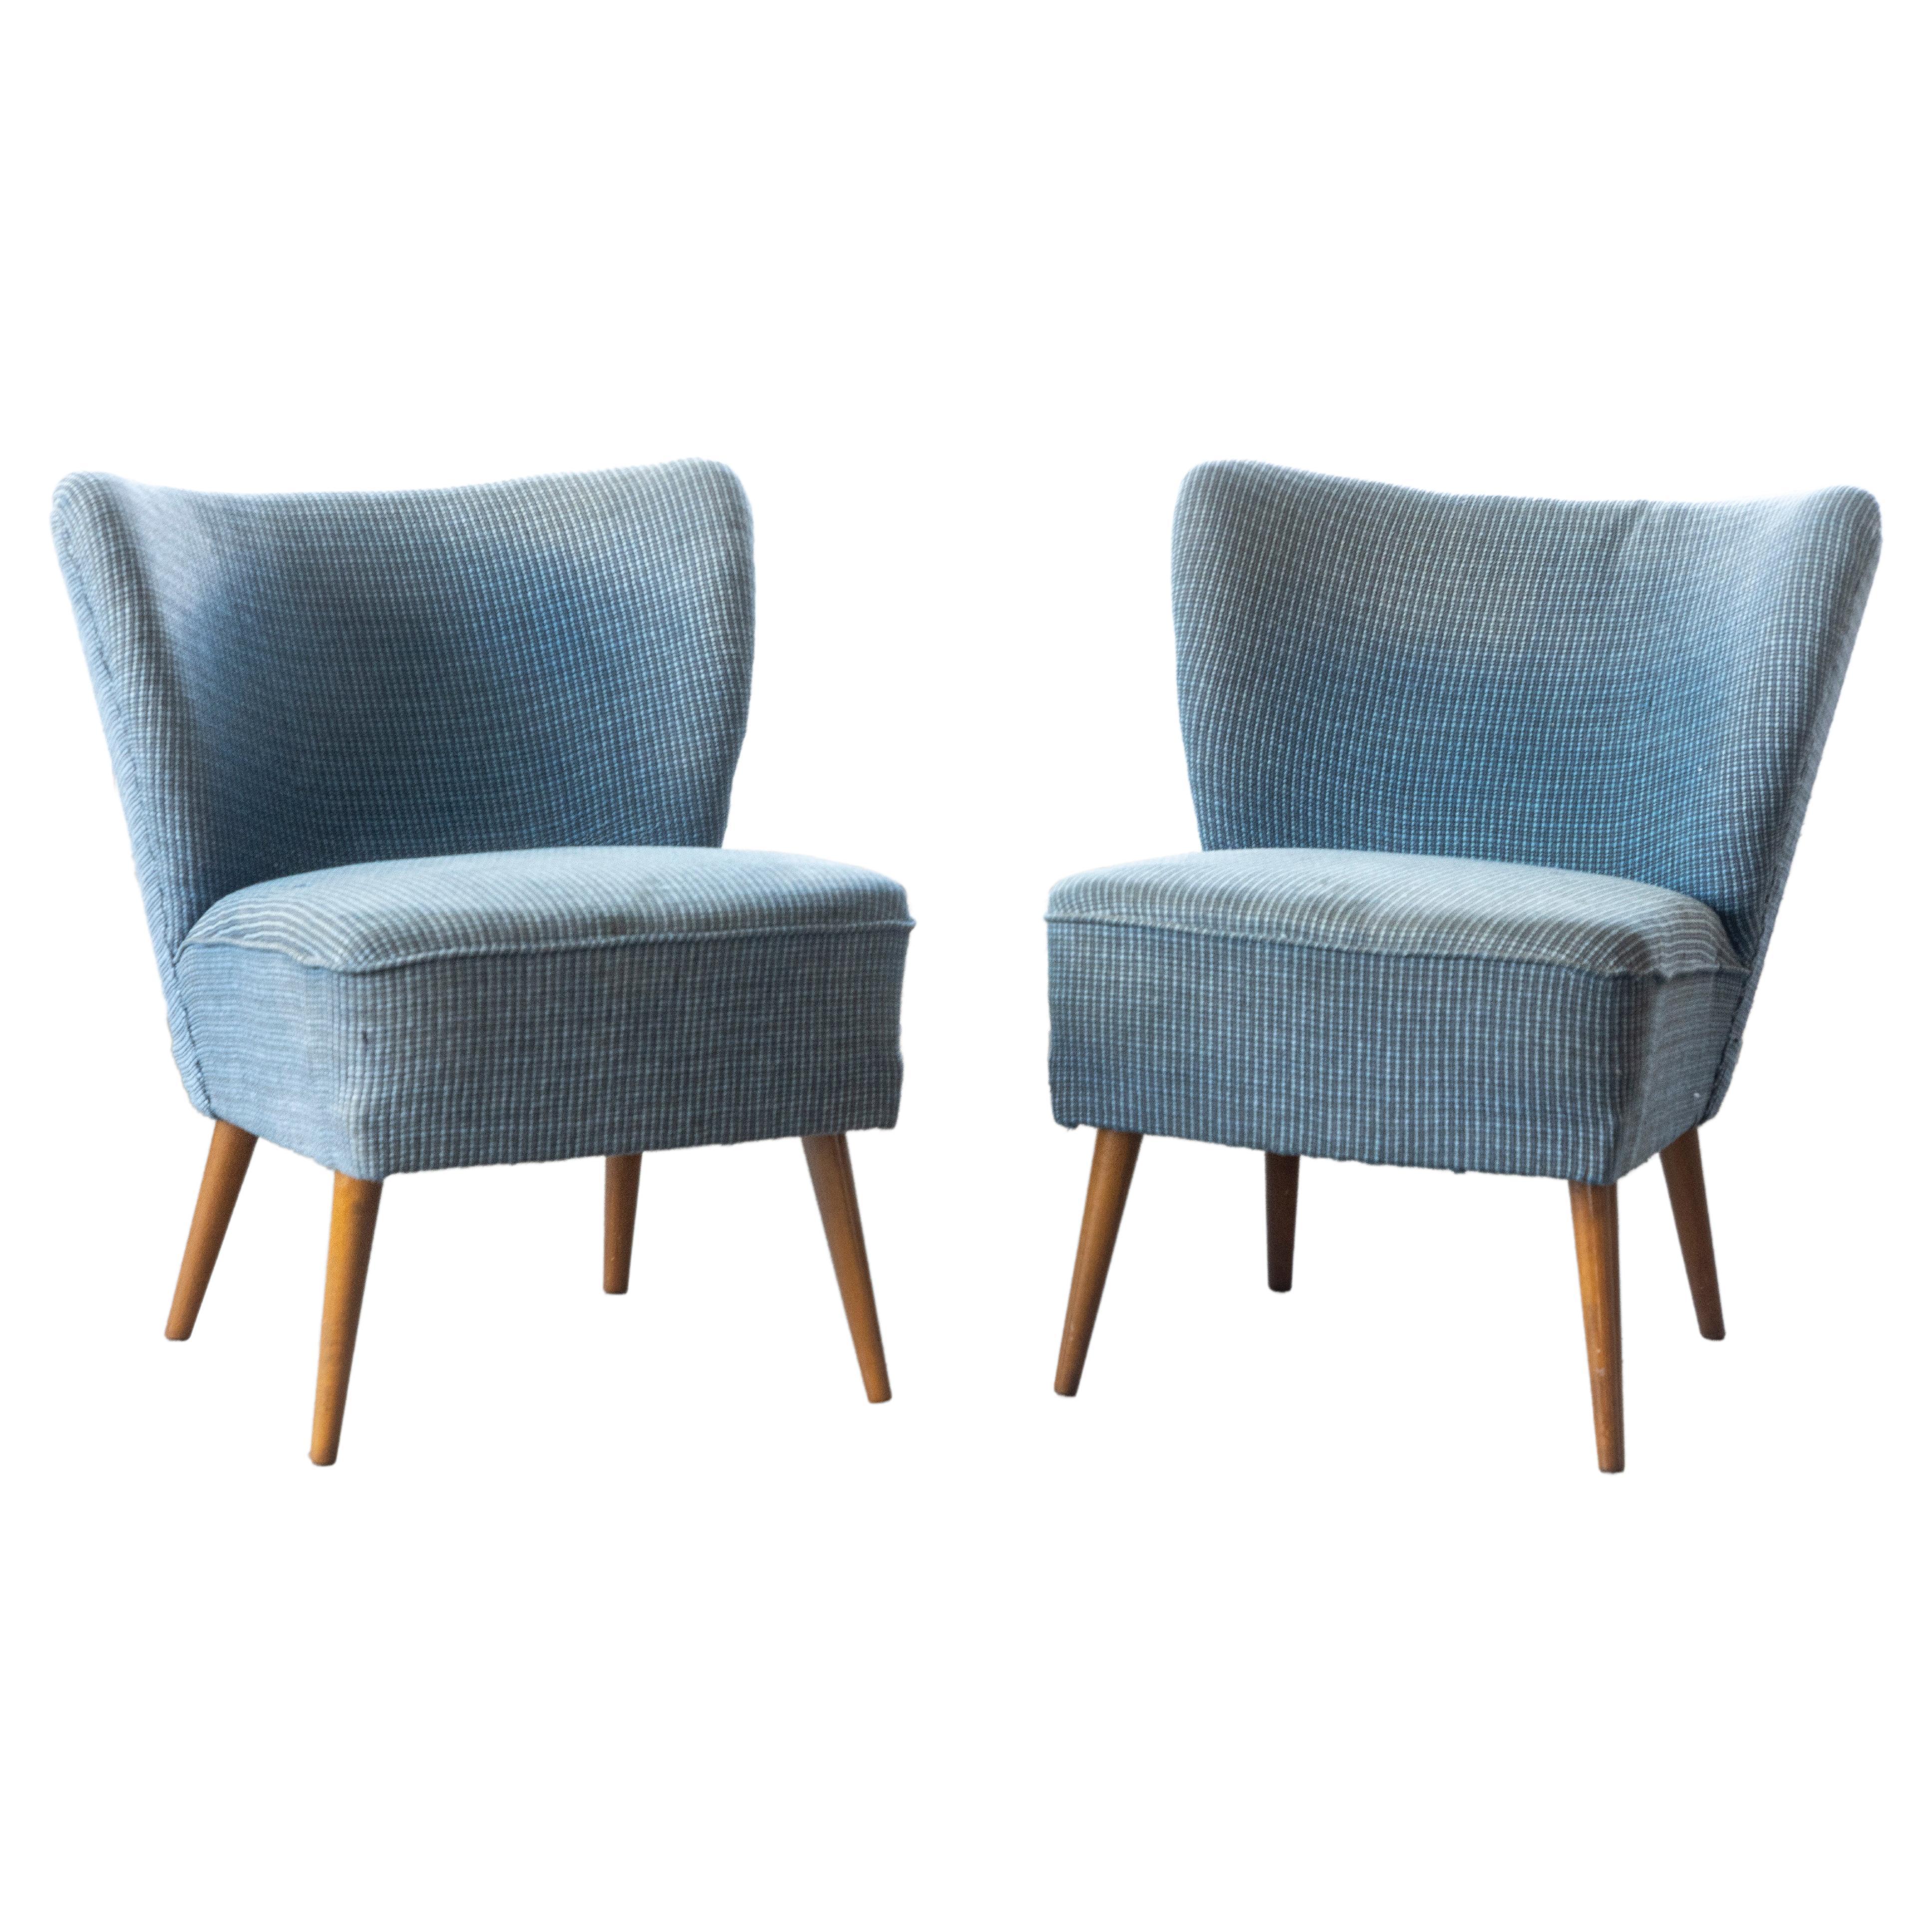 Danish Pair of Midcentury Slipper or Cocktail Lounge Chairs, 1950's For Sale